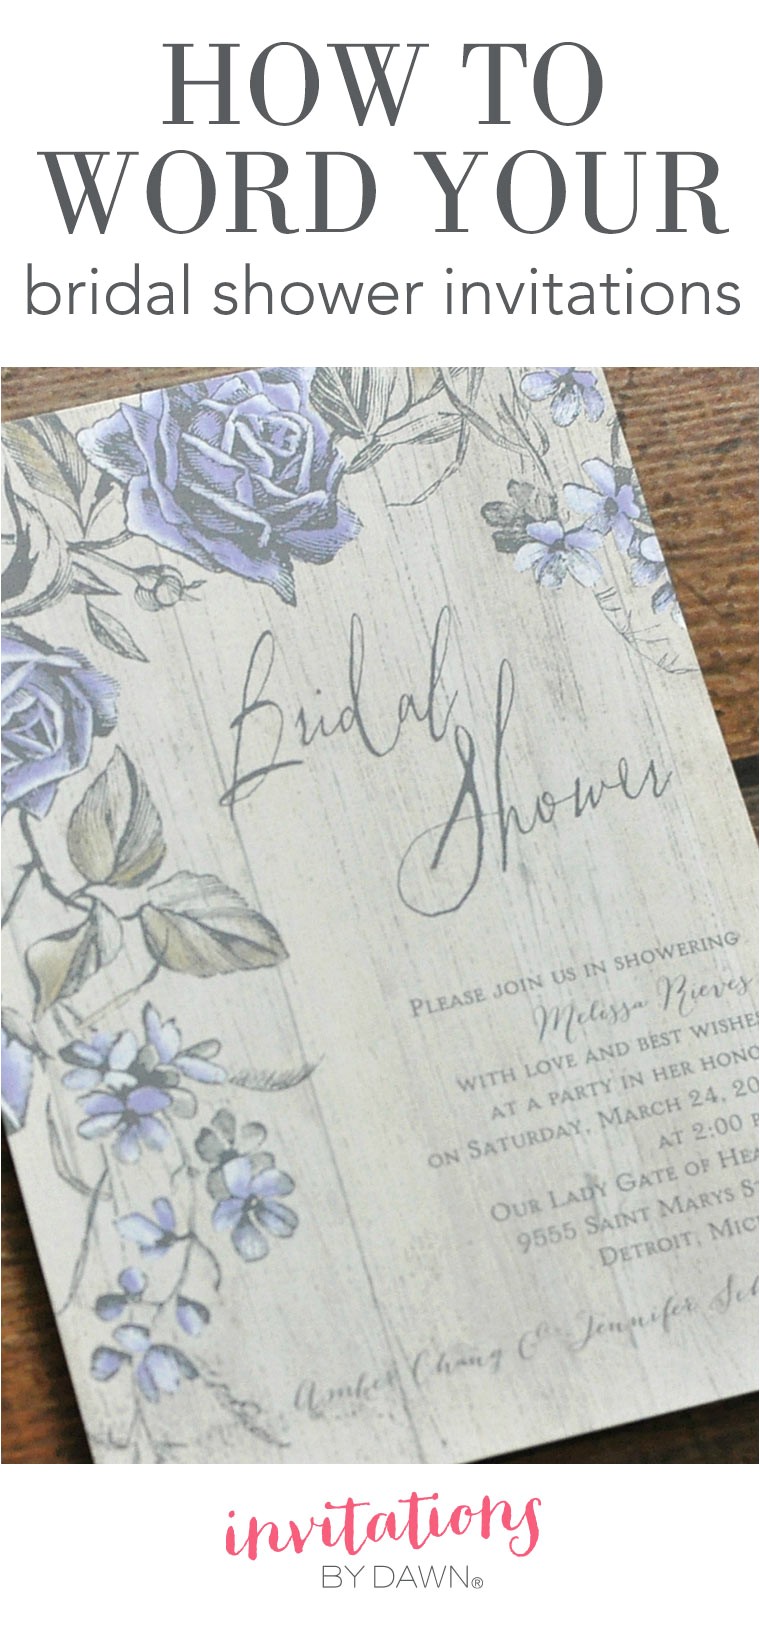 How to Word Bridal Shower Invitations How to Word A Bridal Shower Invitation Invitations by Dawn